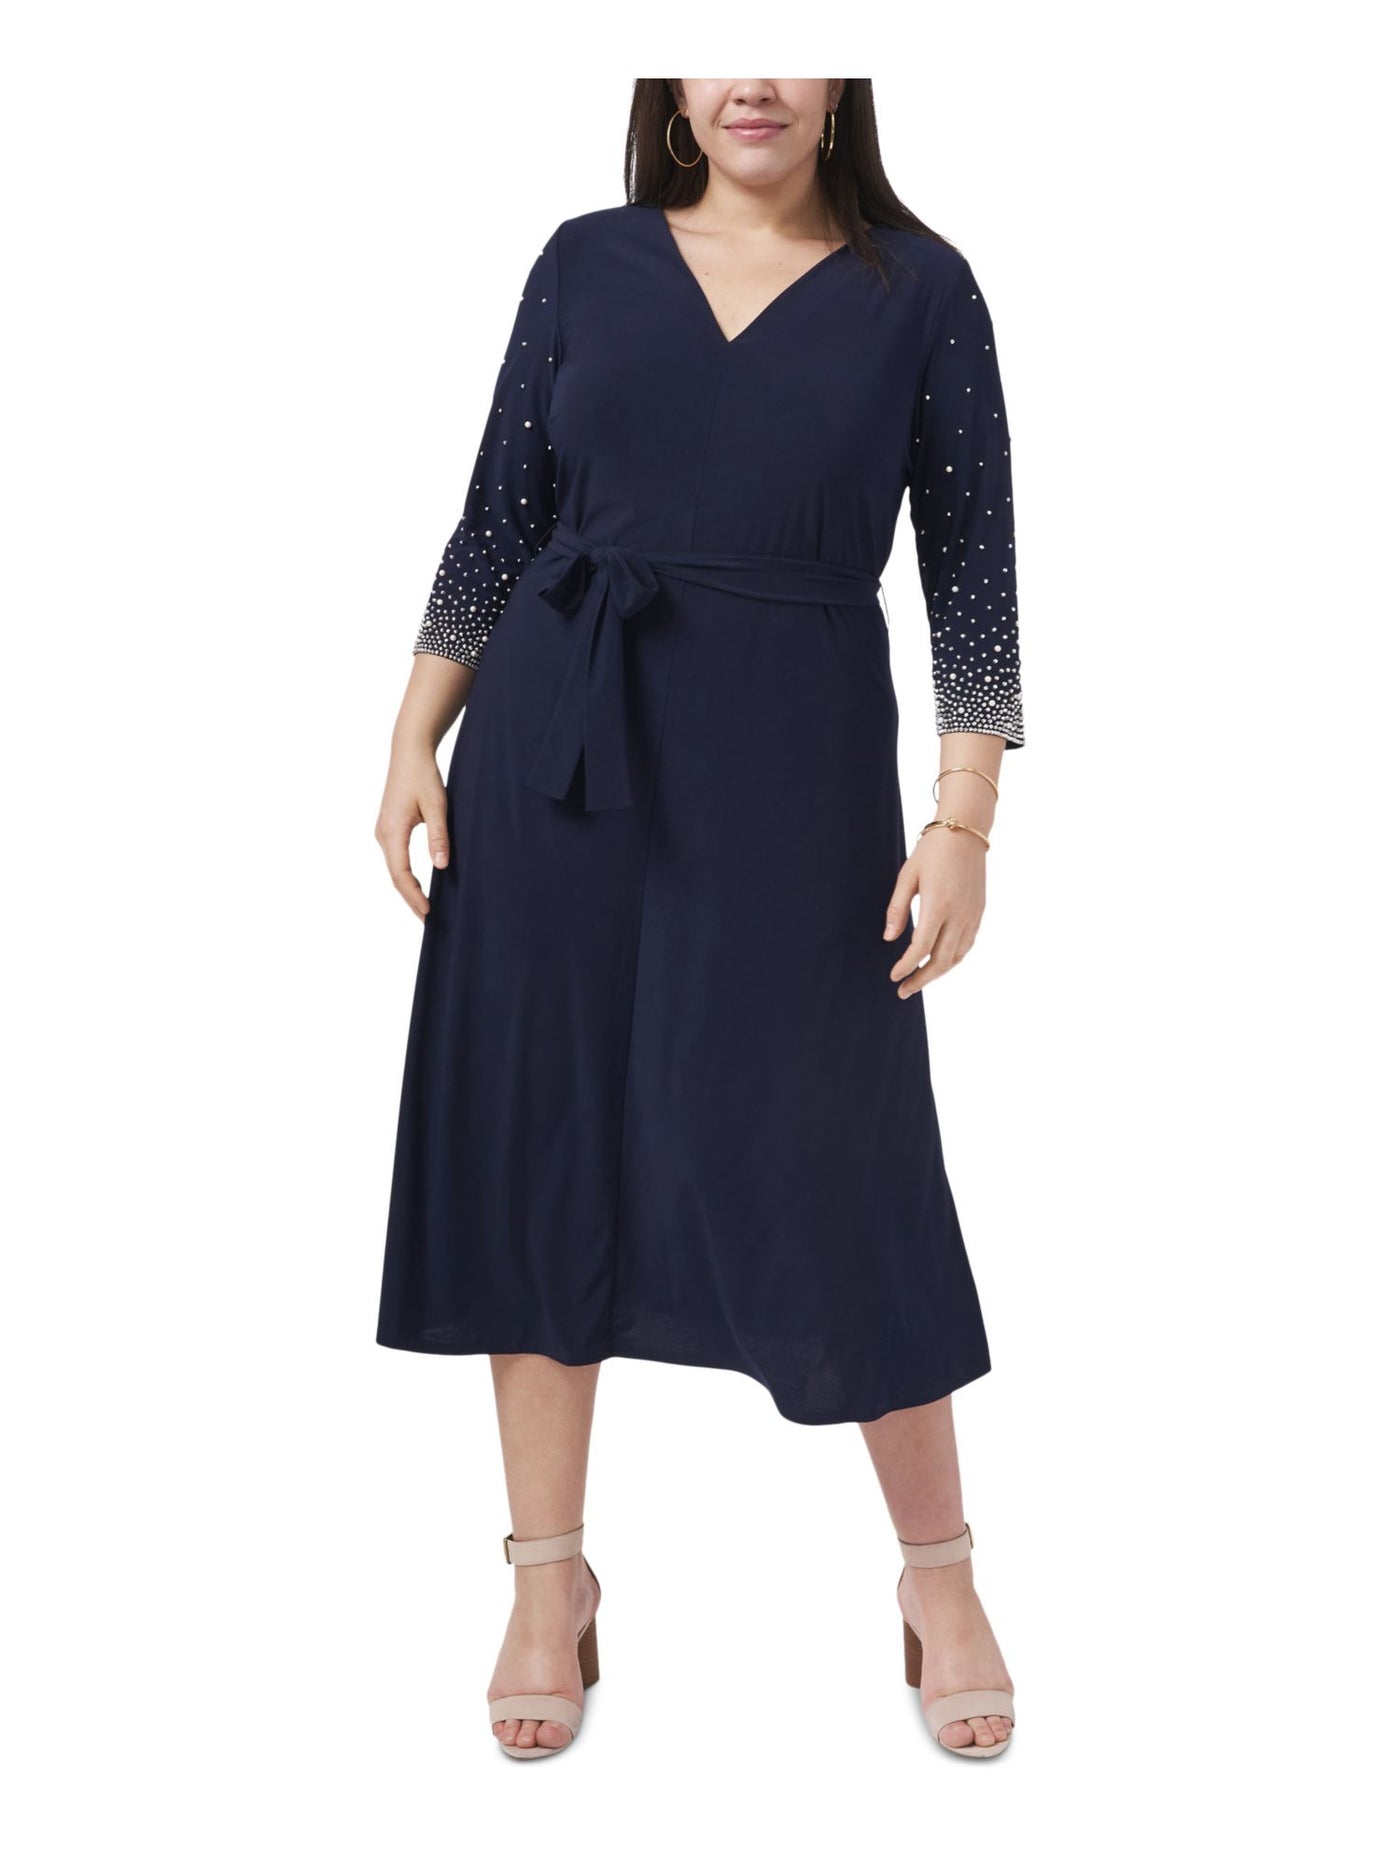 MSK WOMEN Womens Navy Embellished Tie Unlined Pullover 3/4 Sleeve V Neck Midi Formal Fit + Flare Dress Plus 1X